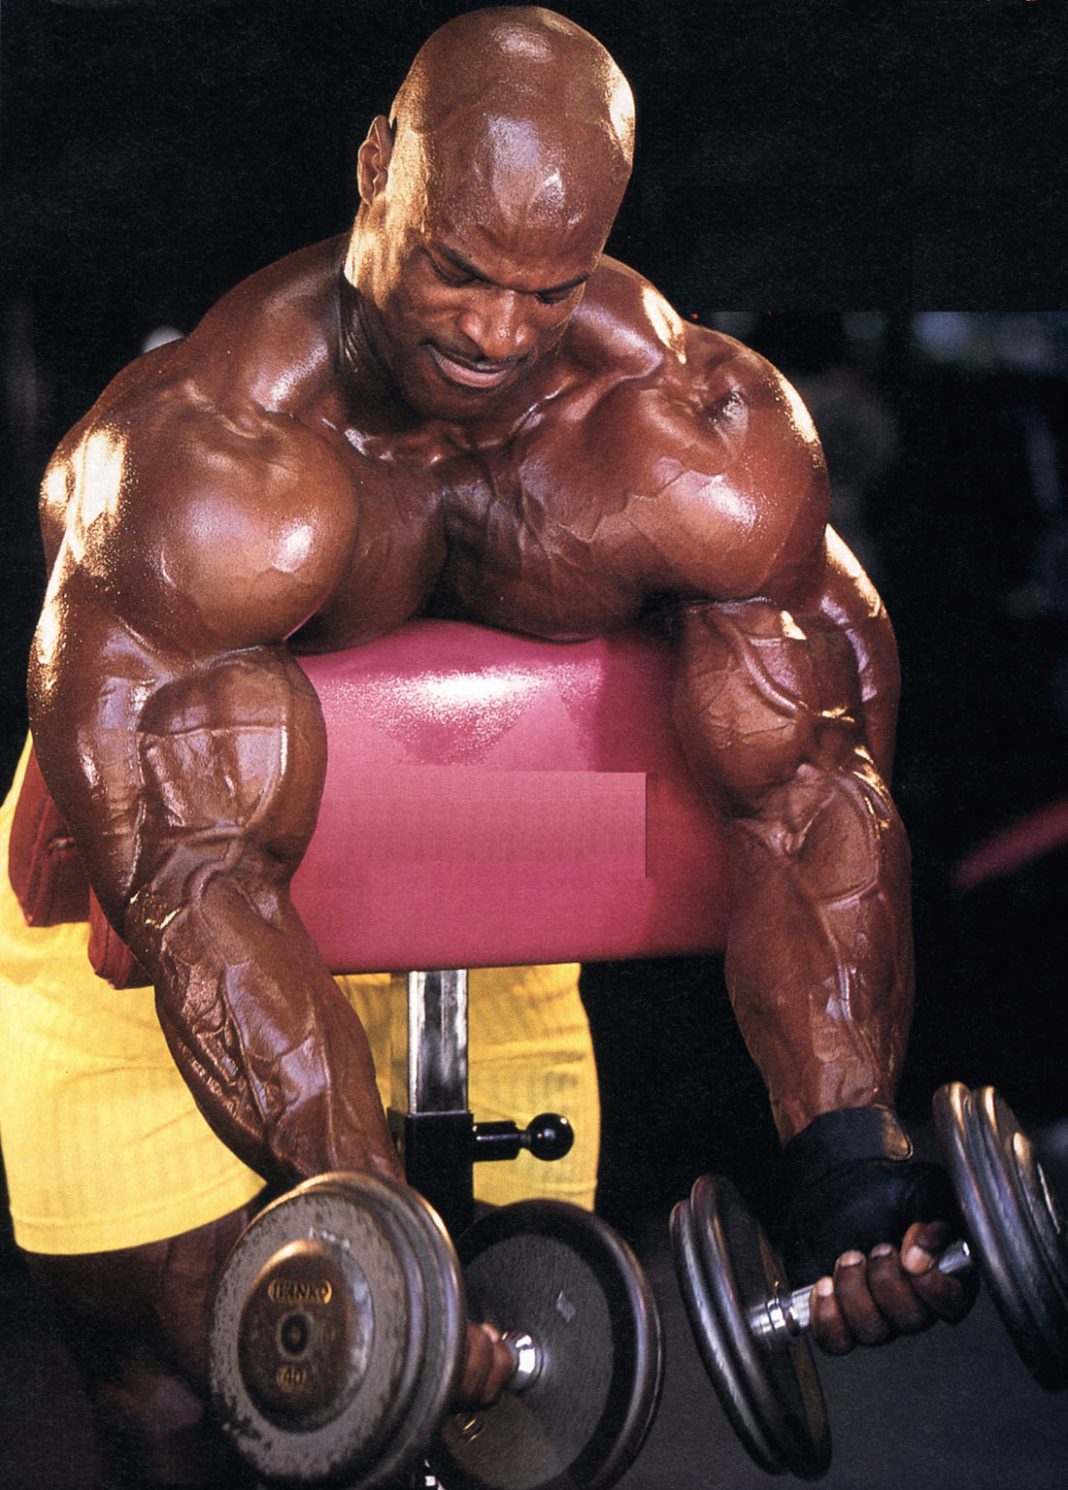 Ronnie Coleman Workout Program and Spreadsheet For KingSized Gains